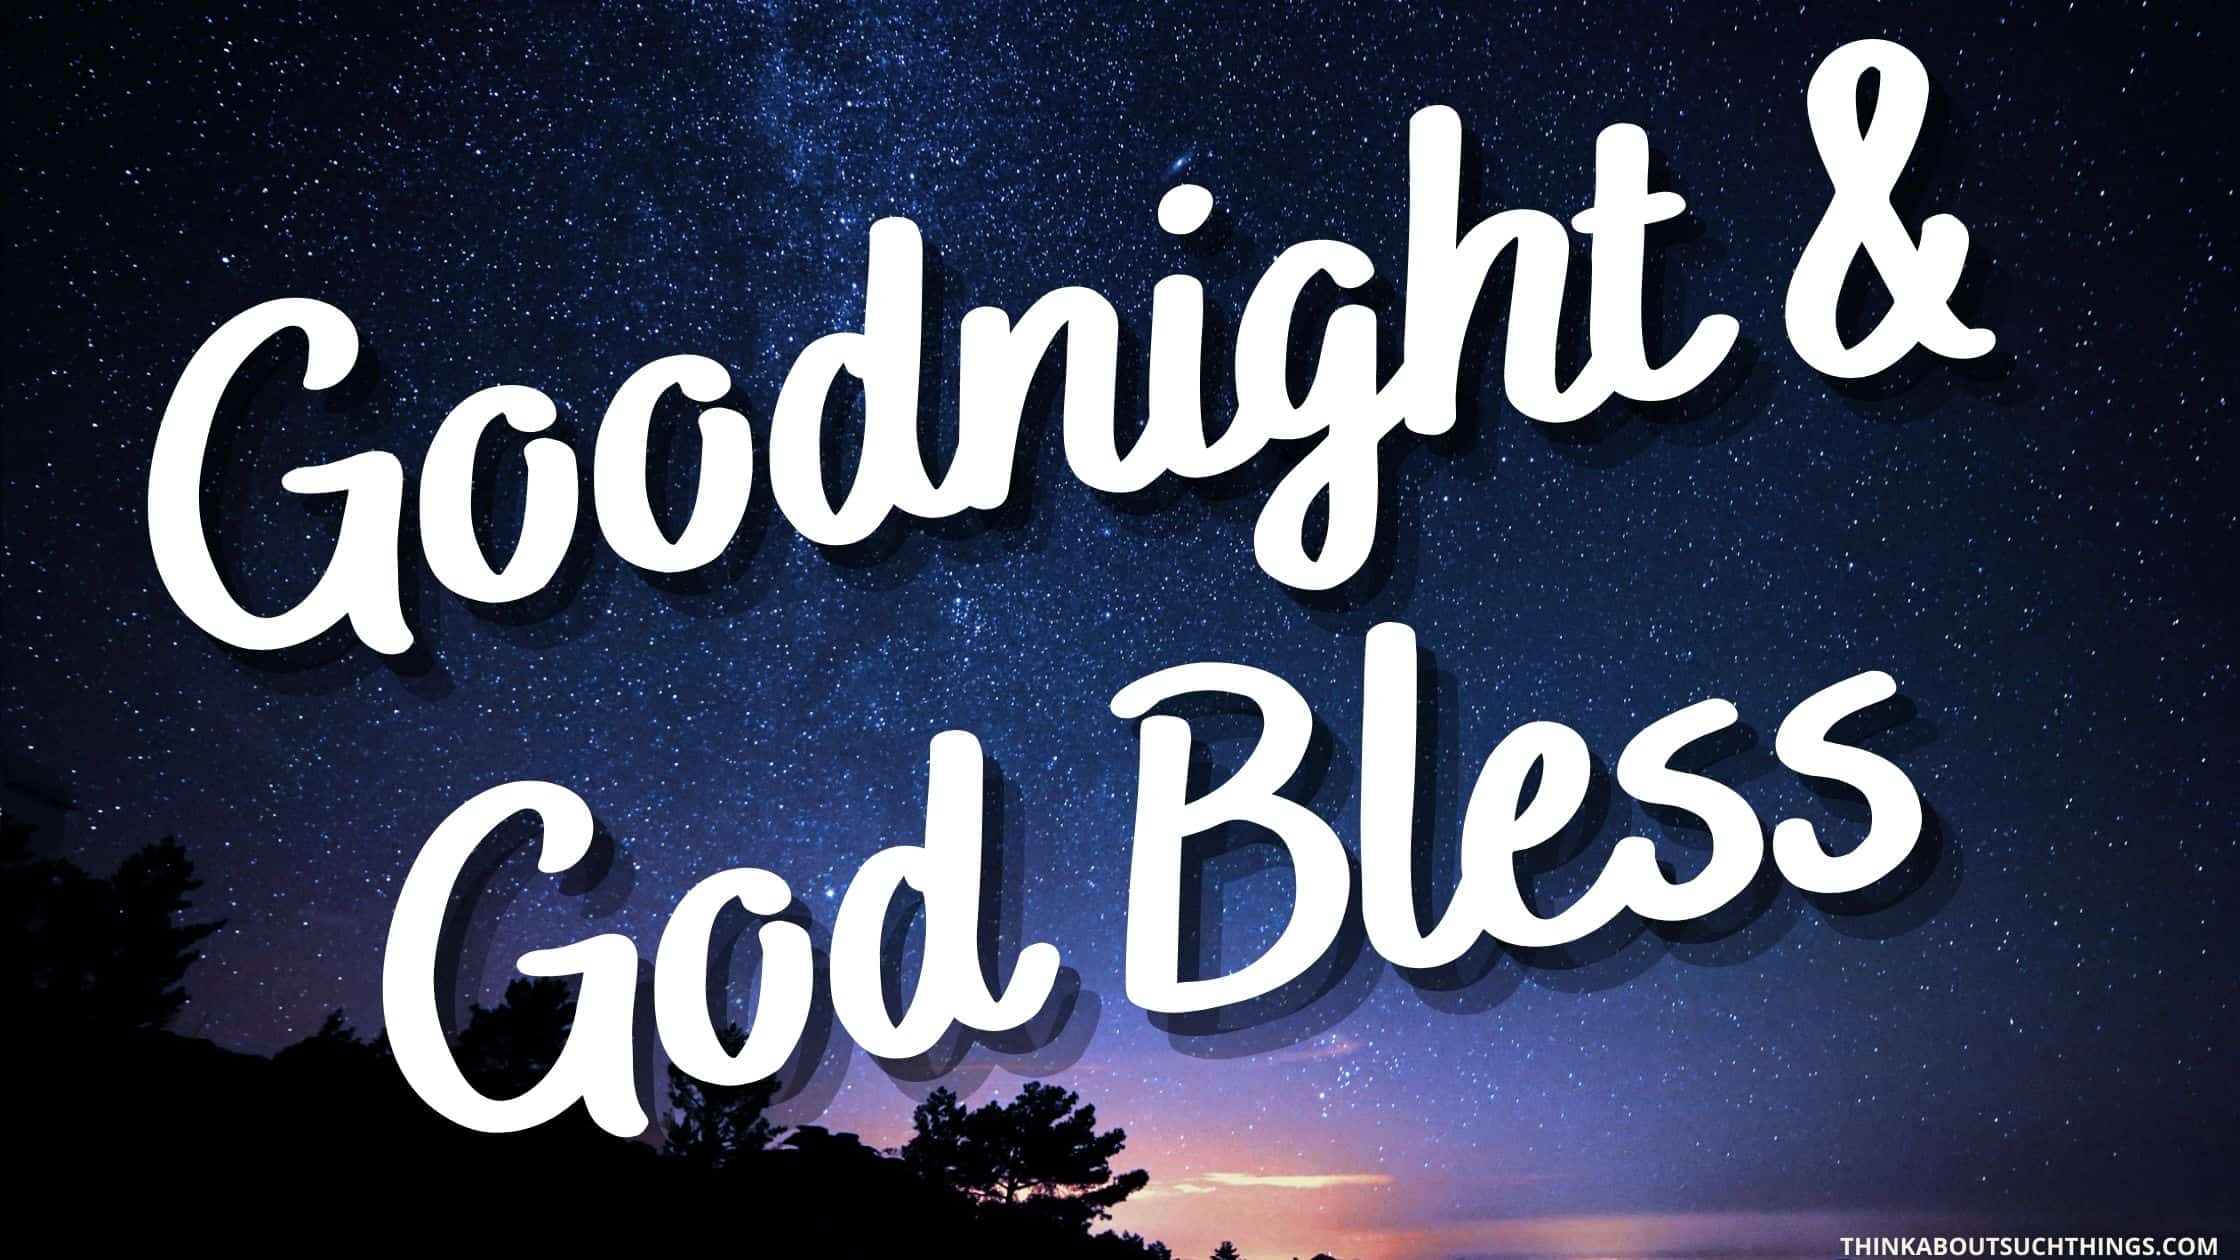 20 Goodnight Blessings To Share With Loved Ones [With Images] | Think About  Such Things